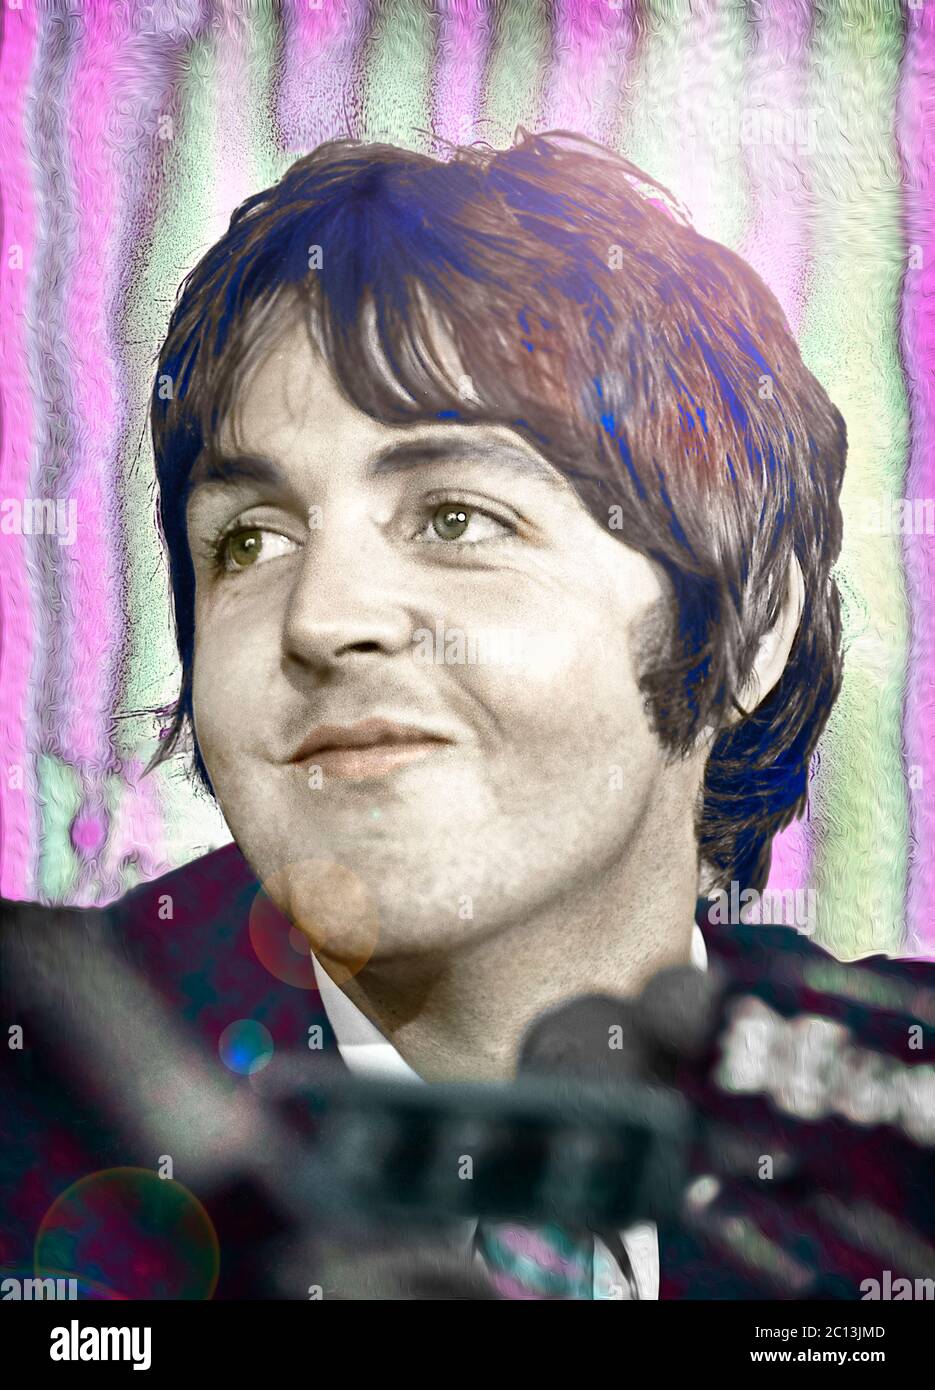 Paul McCartney at a press conference on May 14, 1968, New York.  Here John and Paul described their vision and their hopes for their new Apple Corp. Image colorized from 35mm B&W negative. Stock Photo